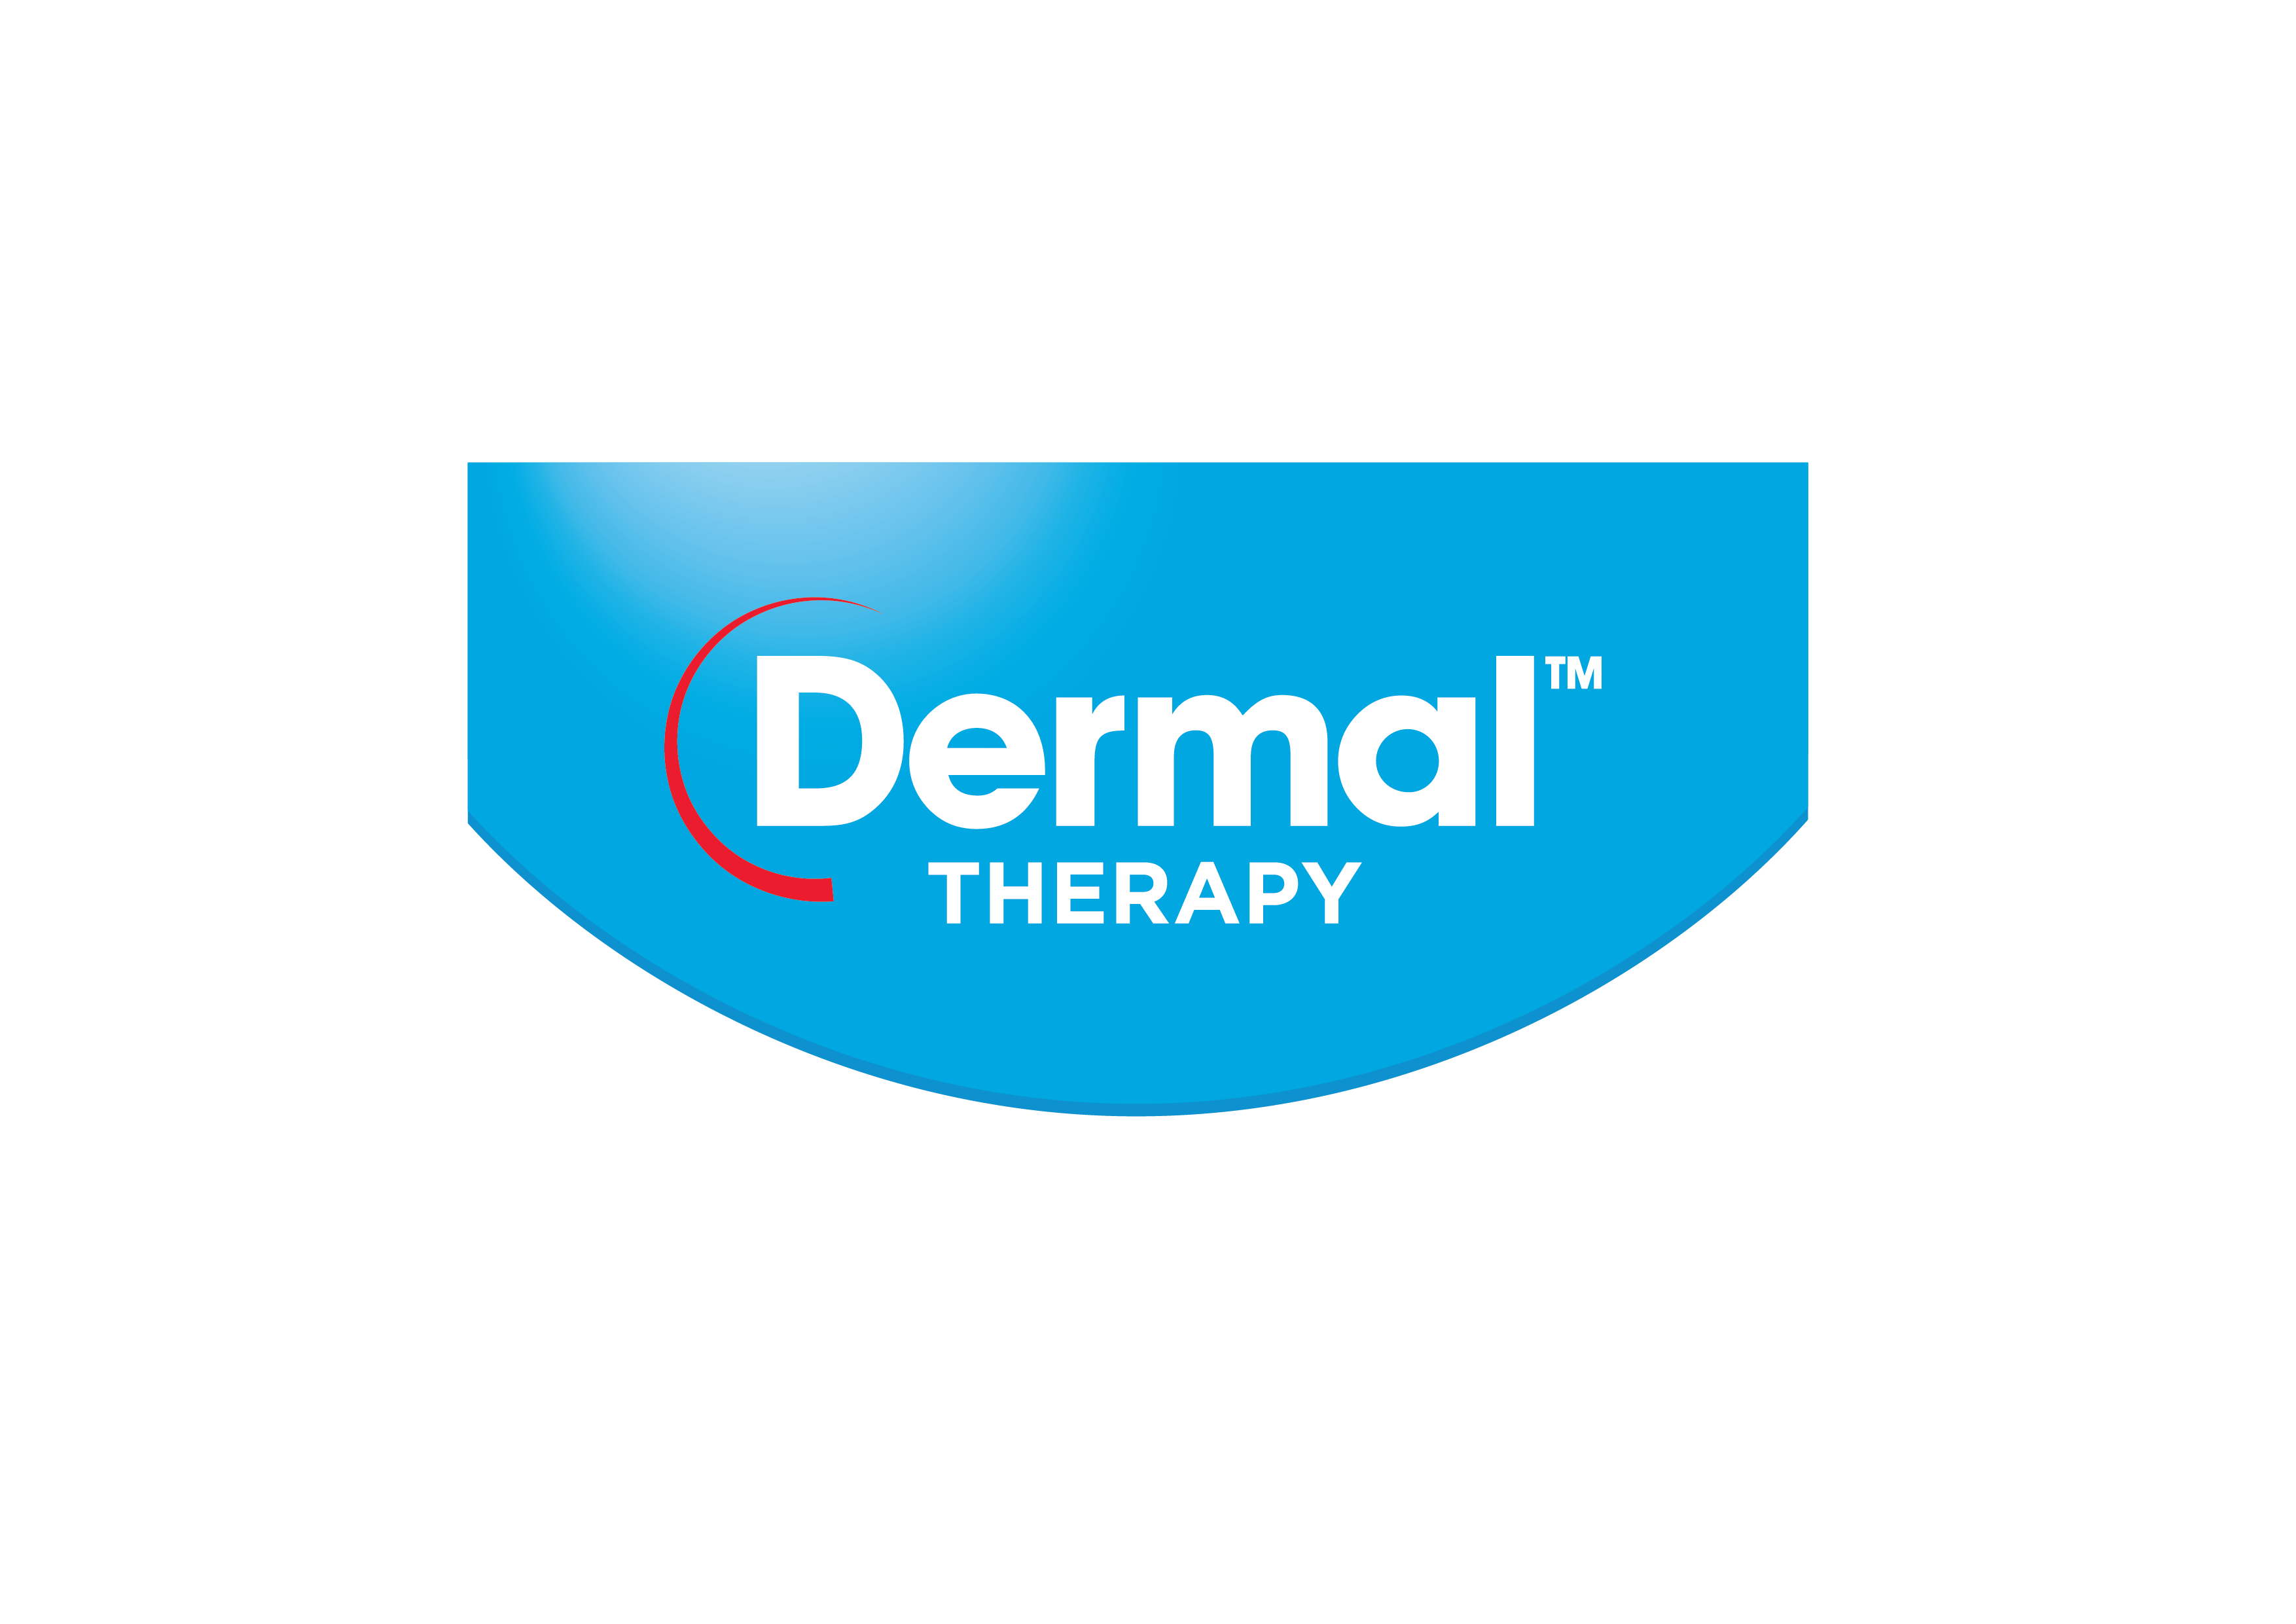 Dermal Therapy